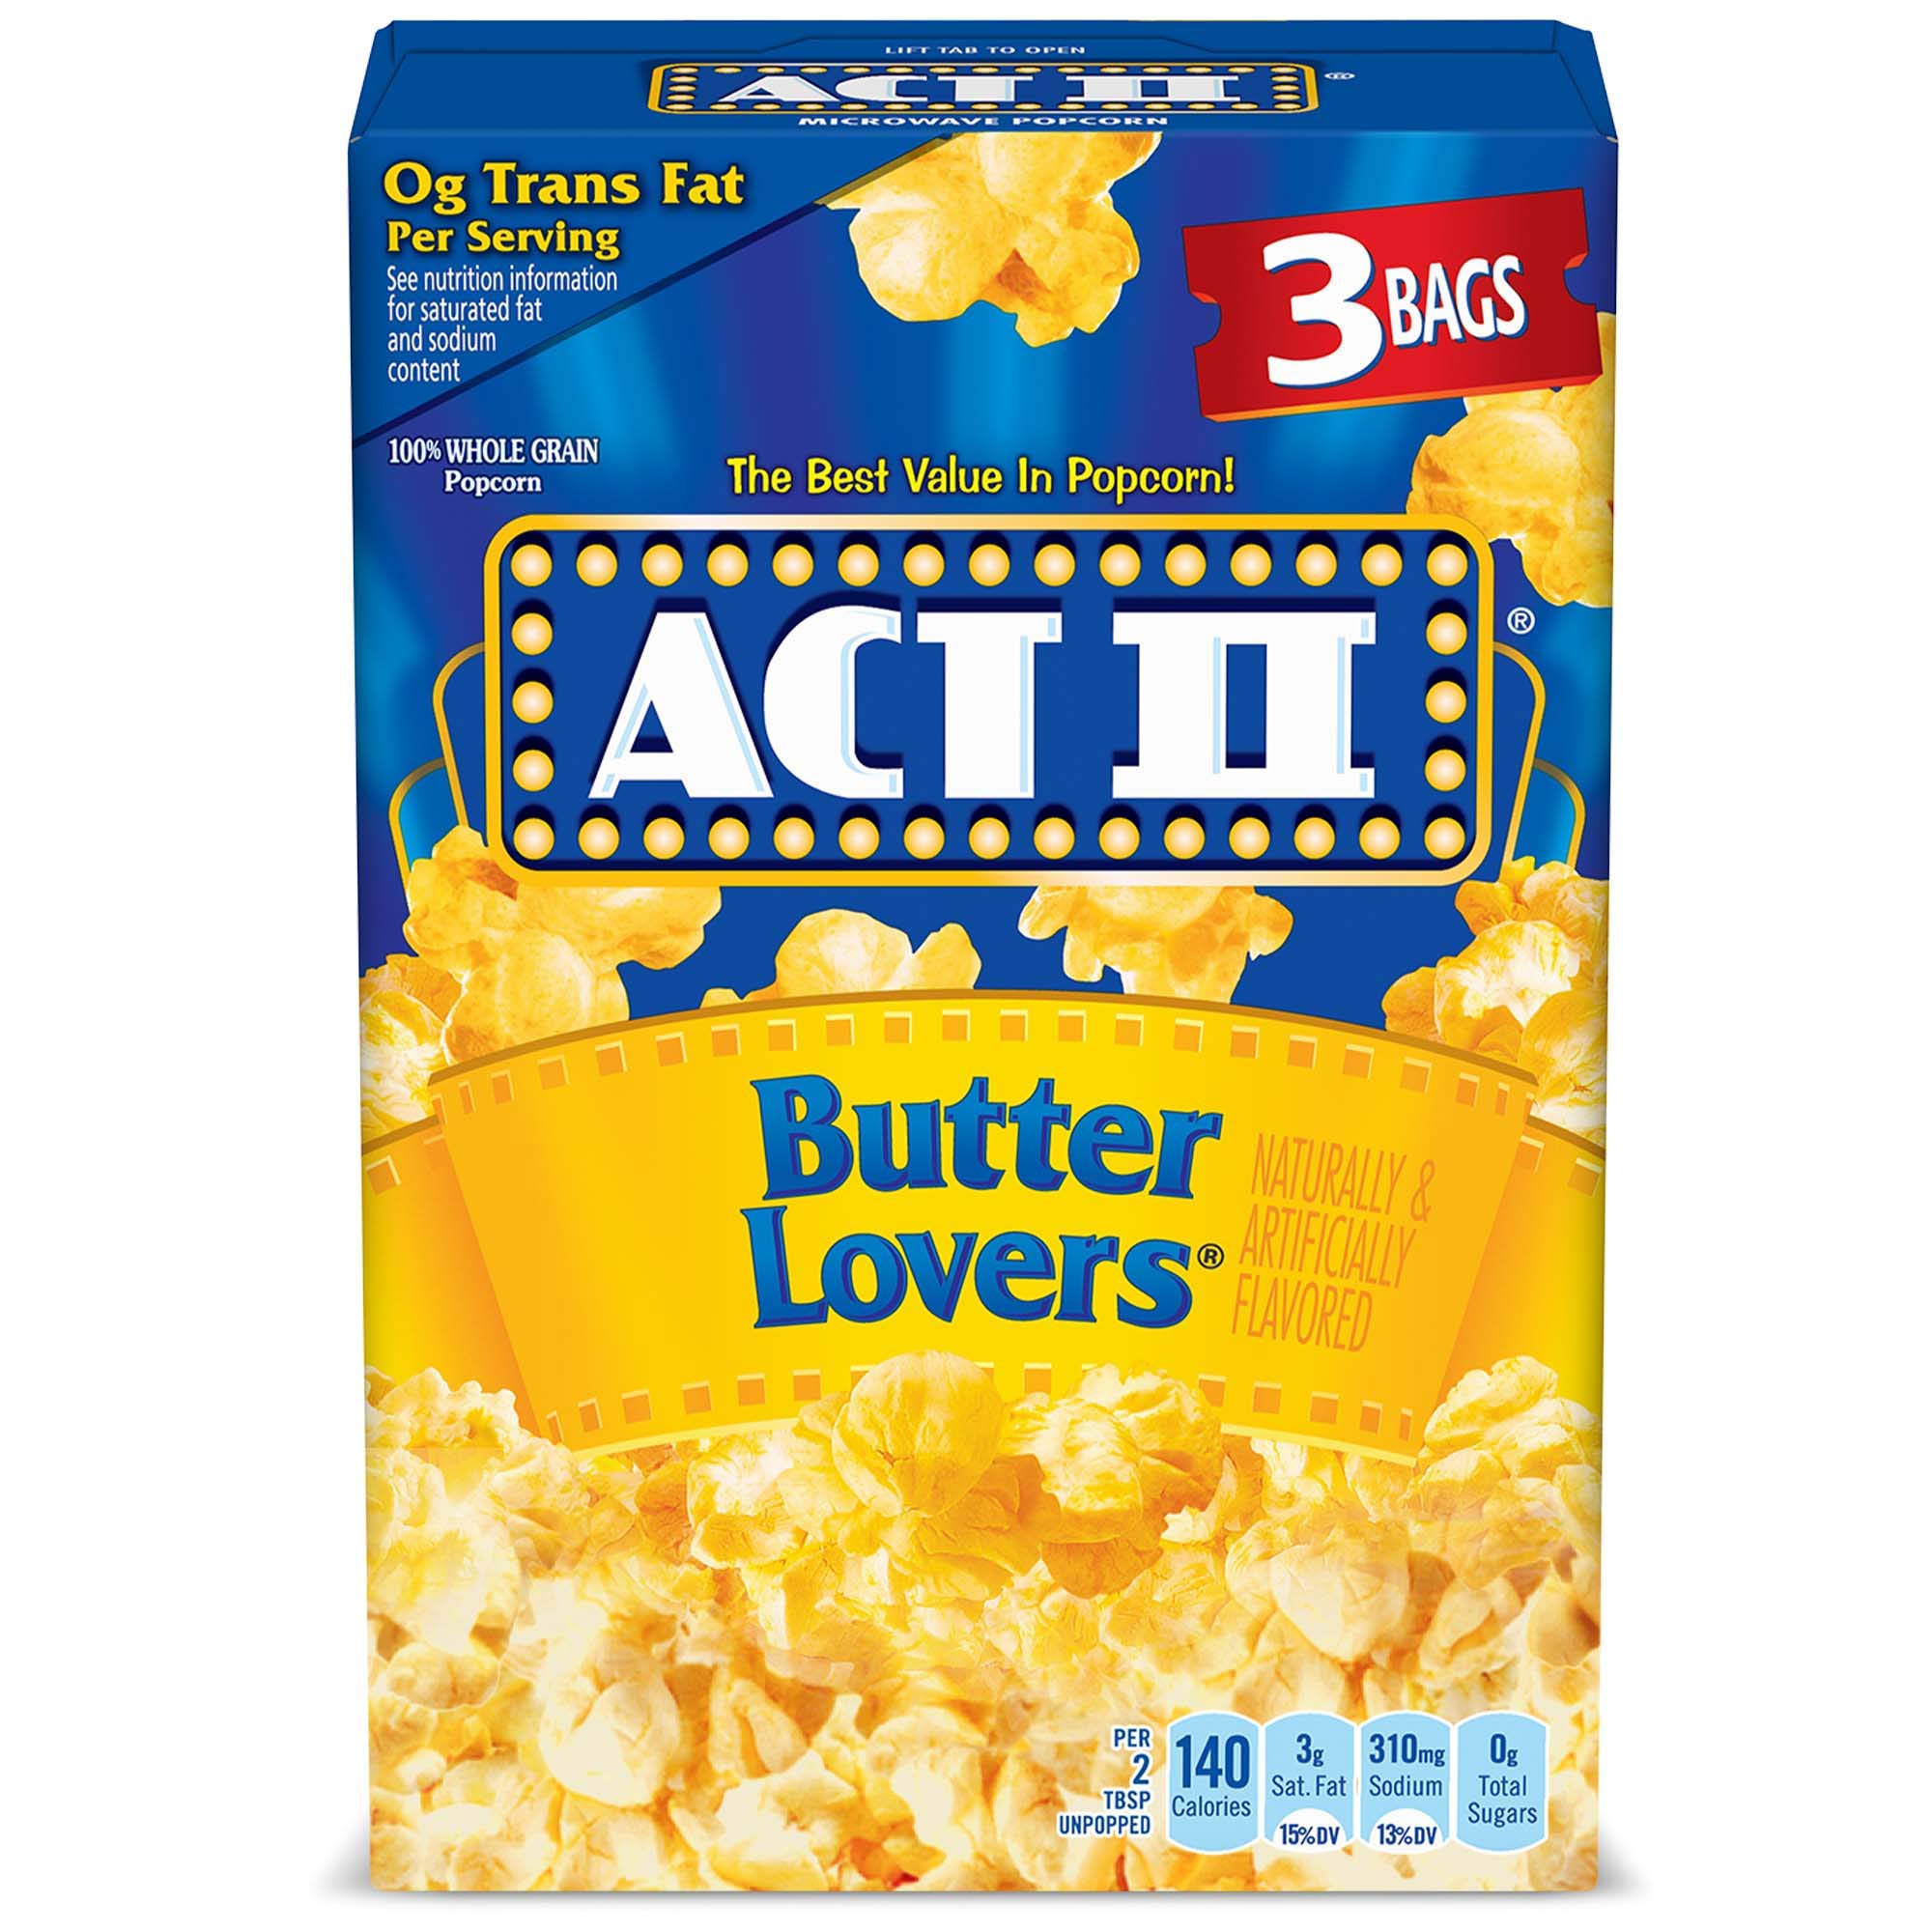 ACT II Butter Lovers Microwave Popcorn, 3-Count 2.75-oz. Bags S&S Free Shipping w/ Prime | $1.19